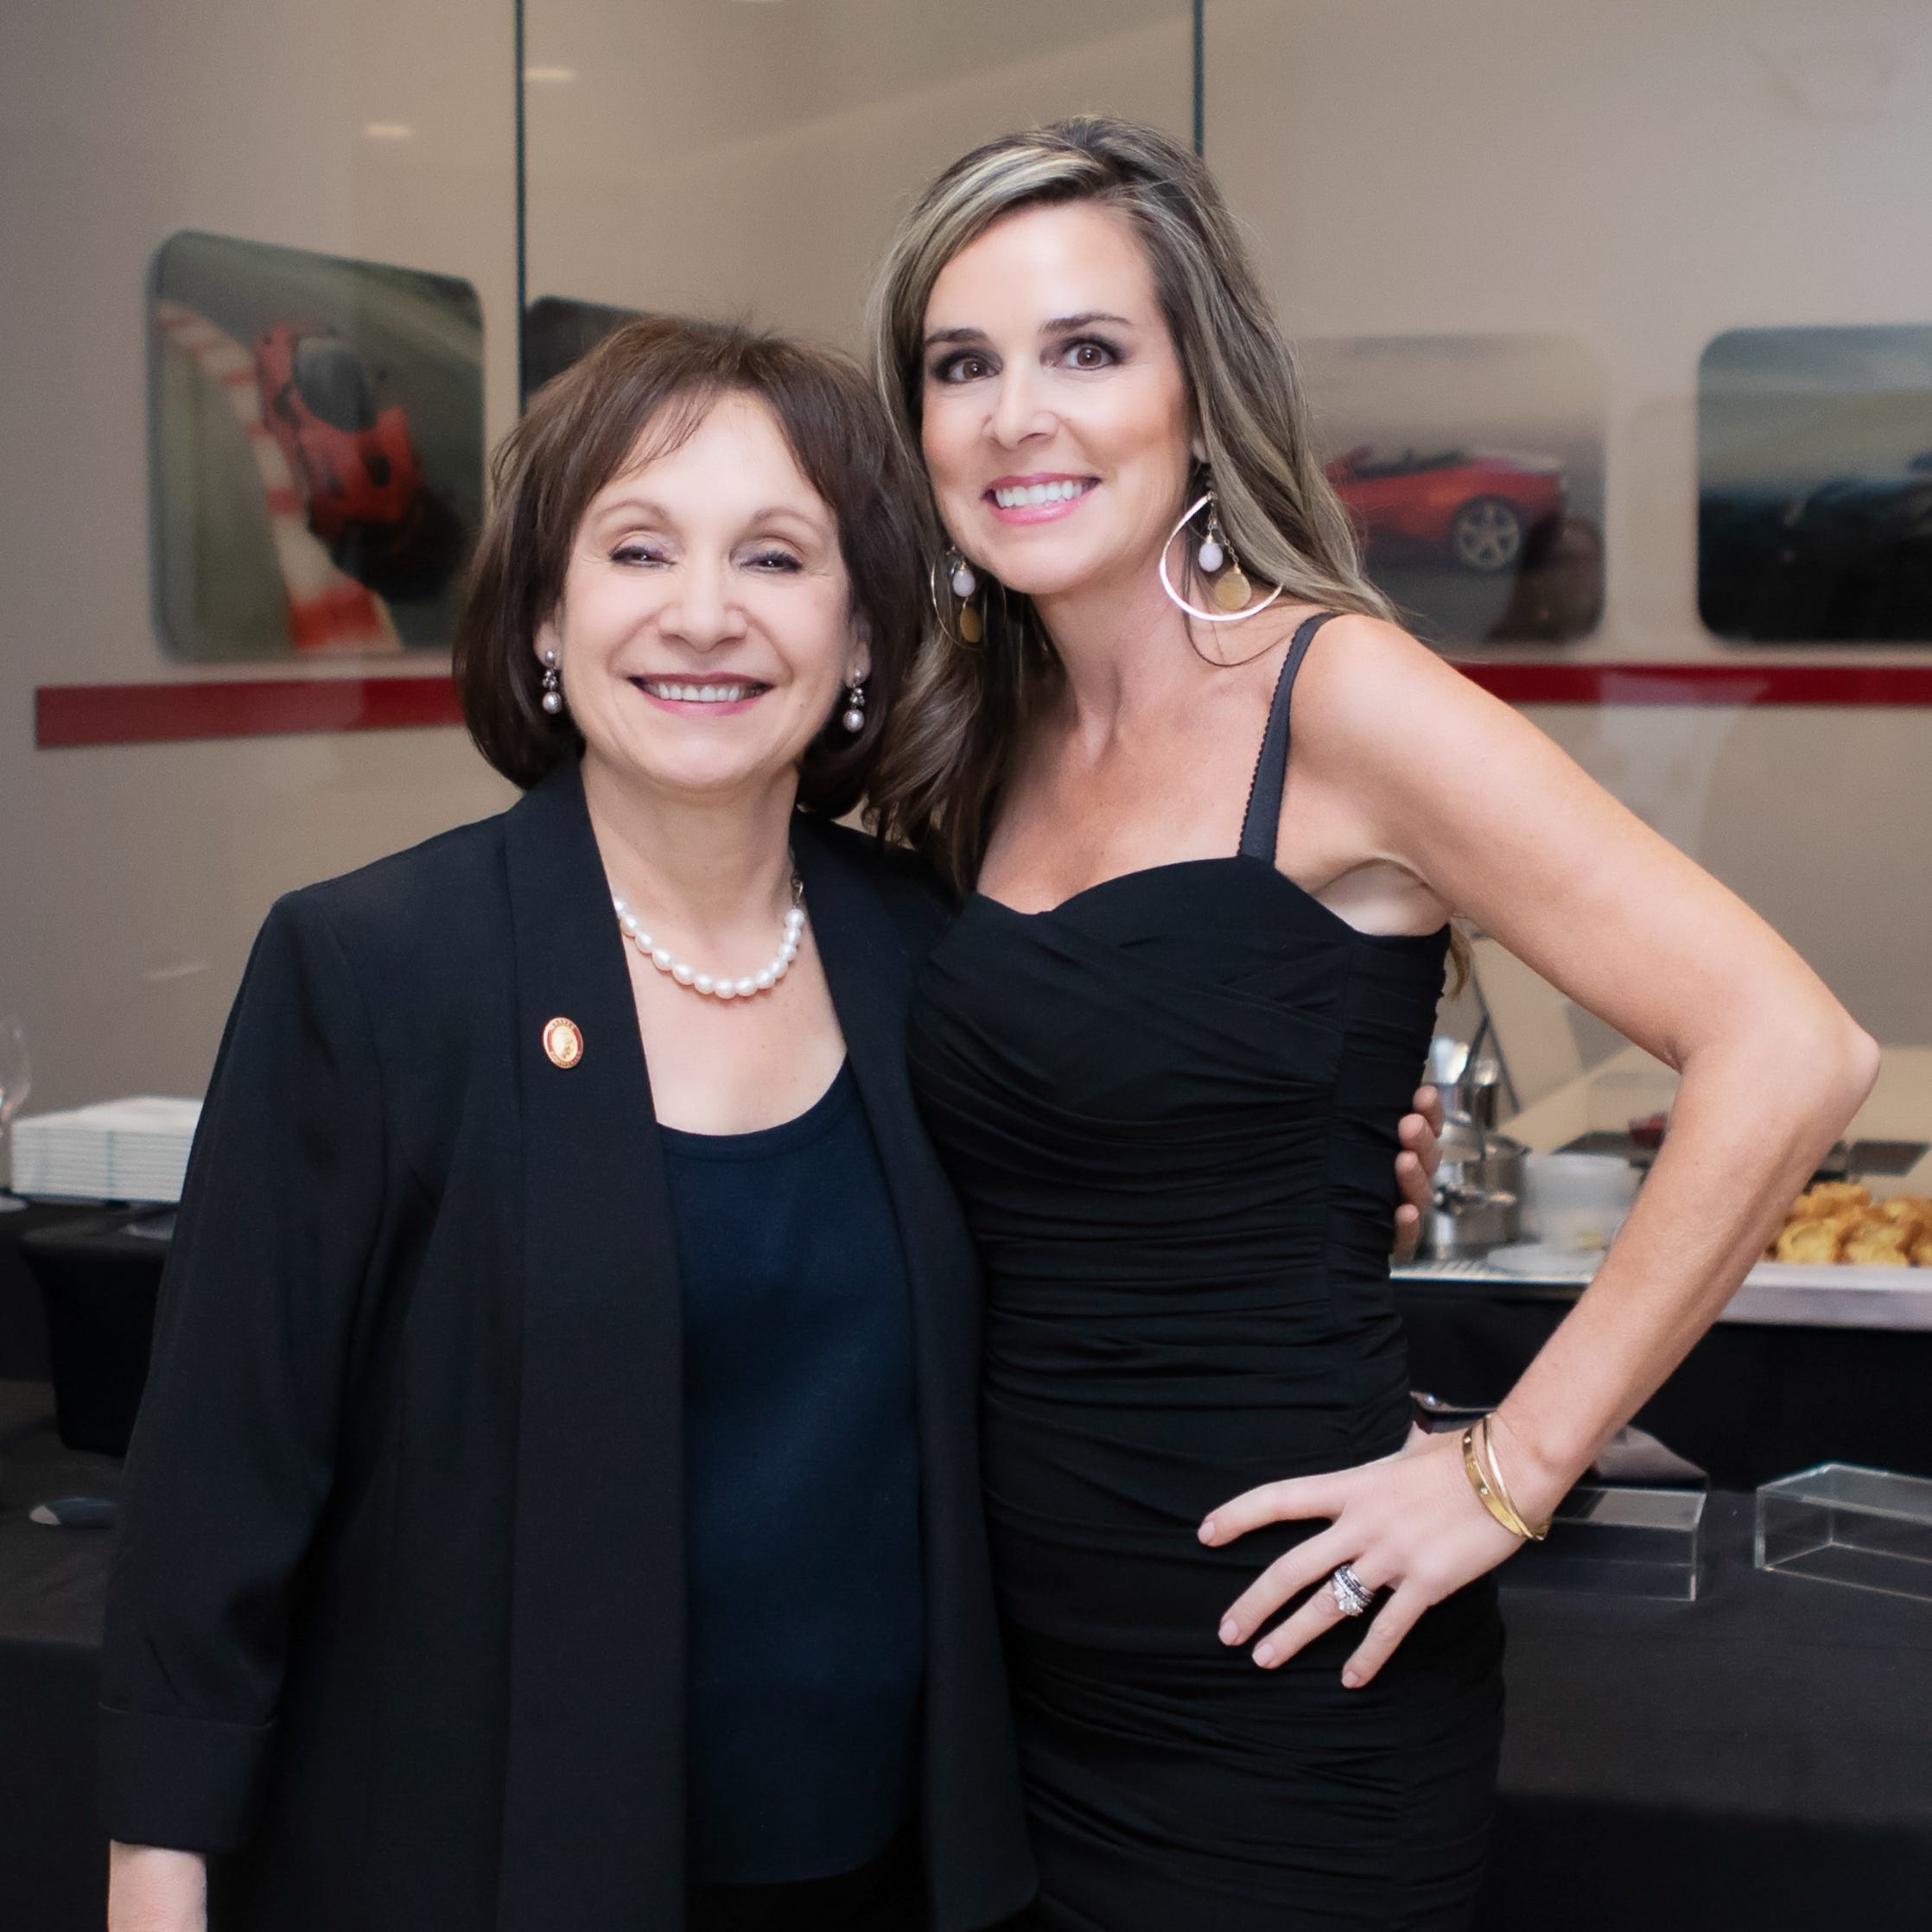 From left, Master Sommelier Madeline Triffon with event founder Flora Migyanka.